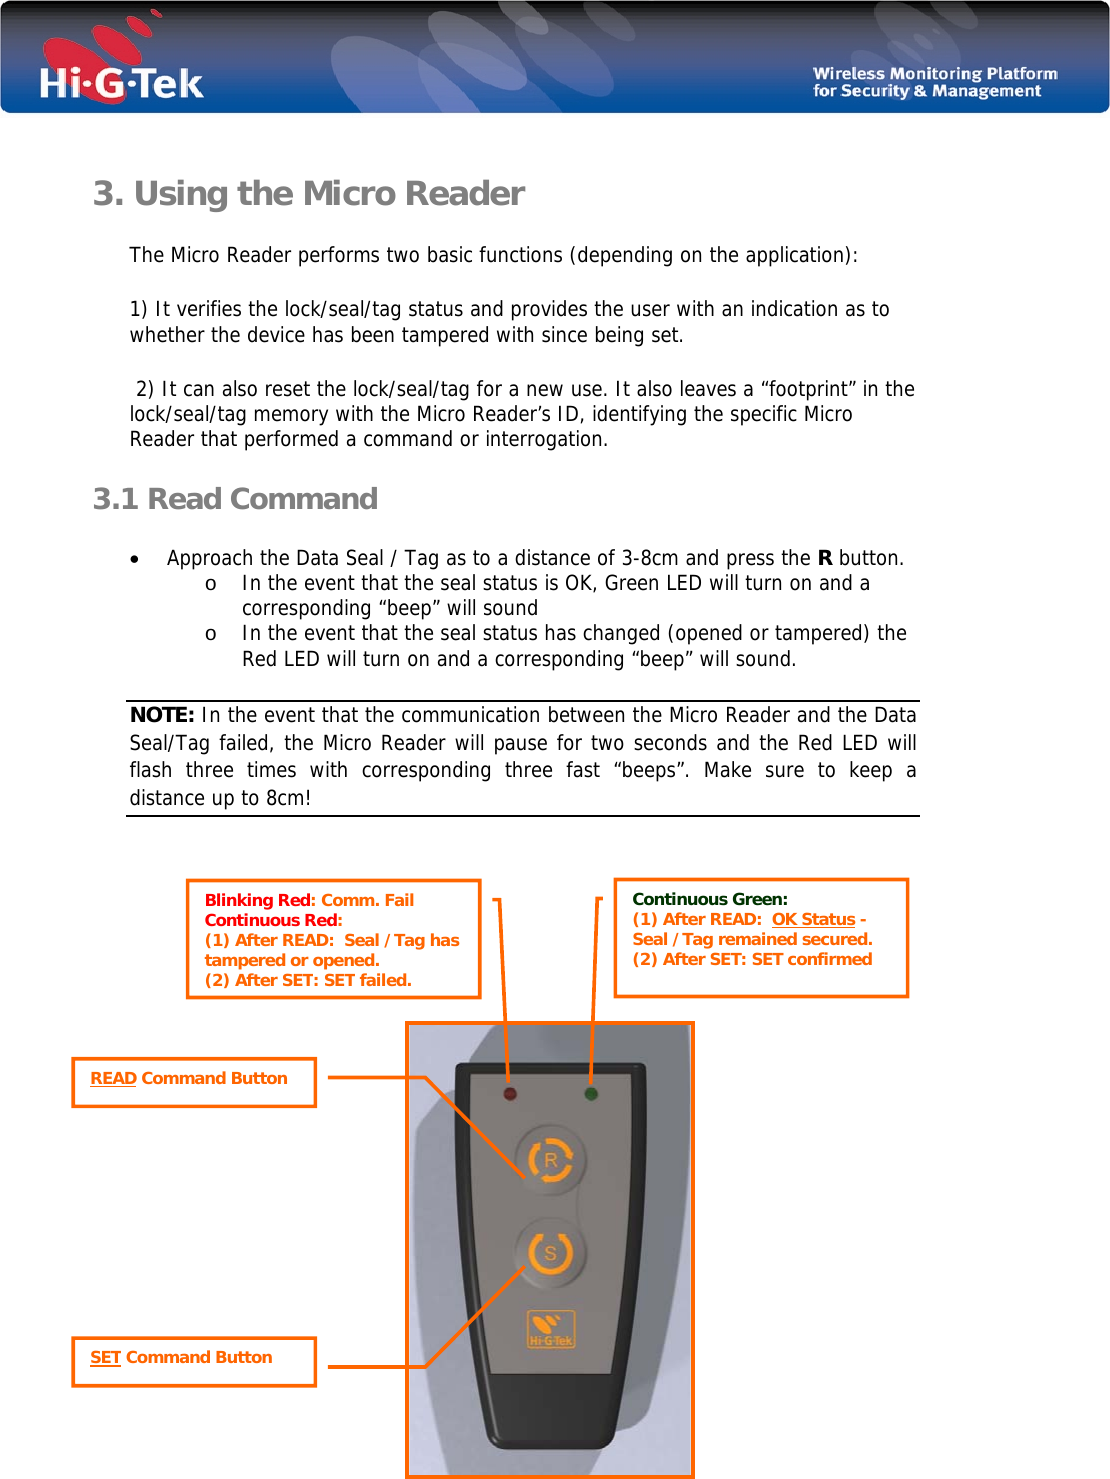   3. Using the Micro Reader The Micro Reader performs two basic functions (depending on the application): 1) It verifies the lock/seal/tag status and provides the user with an indication as to whether the device has been tampered with since being set.  2) It can also reset the lock/seal/tag for a new use. It also leaves a “footprint” in the lock/seal/tag memory with the Micro Reader’s ID, identifying the specific Micro Reader that performed a command or interrogation.  3.1 Read Command  • Approach the Data Seal / Tag as to a distance of 3-8cm and press the R button. o In the event that the seal status is OK, Green LED will turn on and a corresponding “beep” will sound  o In the event that the seal status has changed (opened or tampered) the Red LED will turn on and a corresponding “beep” will sound. NOTE: In the event that the communication between the Micro Reader and the Data Seal/Tag failed, the Micro Reader will pause for two seconds and the Red LED will flash three times with corresponding three fast “beeps”. Make sure to keep a distance up to 8cm!              Blinking Red: Comm. Fail Continuous Red:  (1) After READ:  Seal /Tag has tampered or opened. (2) After SET: SET failed.  READ Command Button SET Command Button Continuous Green: (1) After READ:  OK Status - Seal /Tag remained secured.  (2) After SET: SET confirmed  